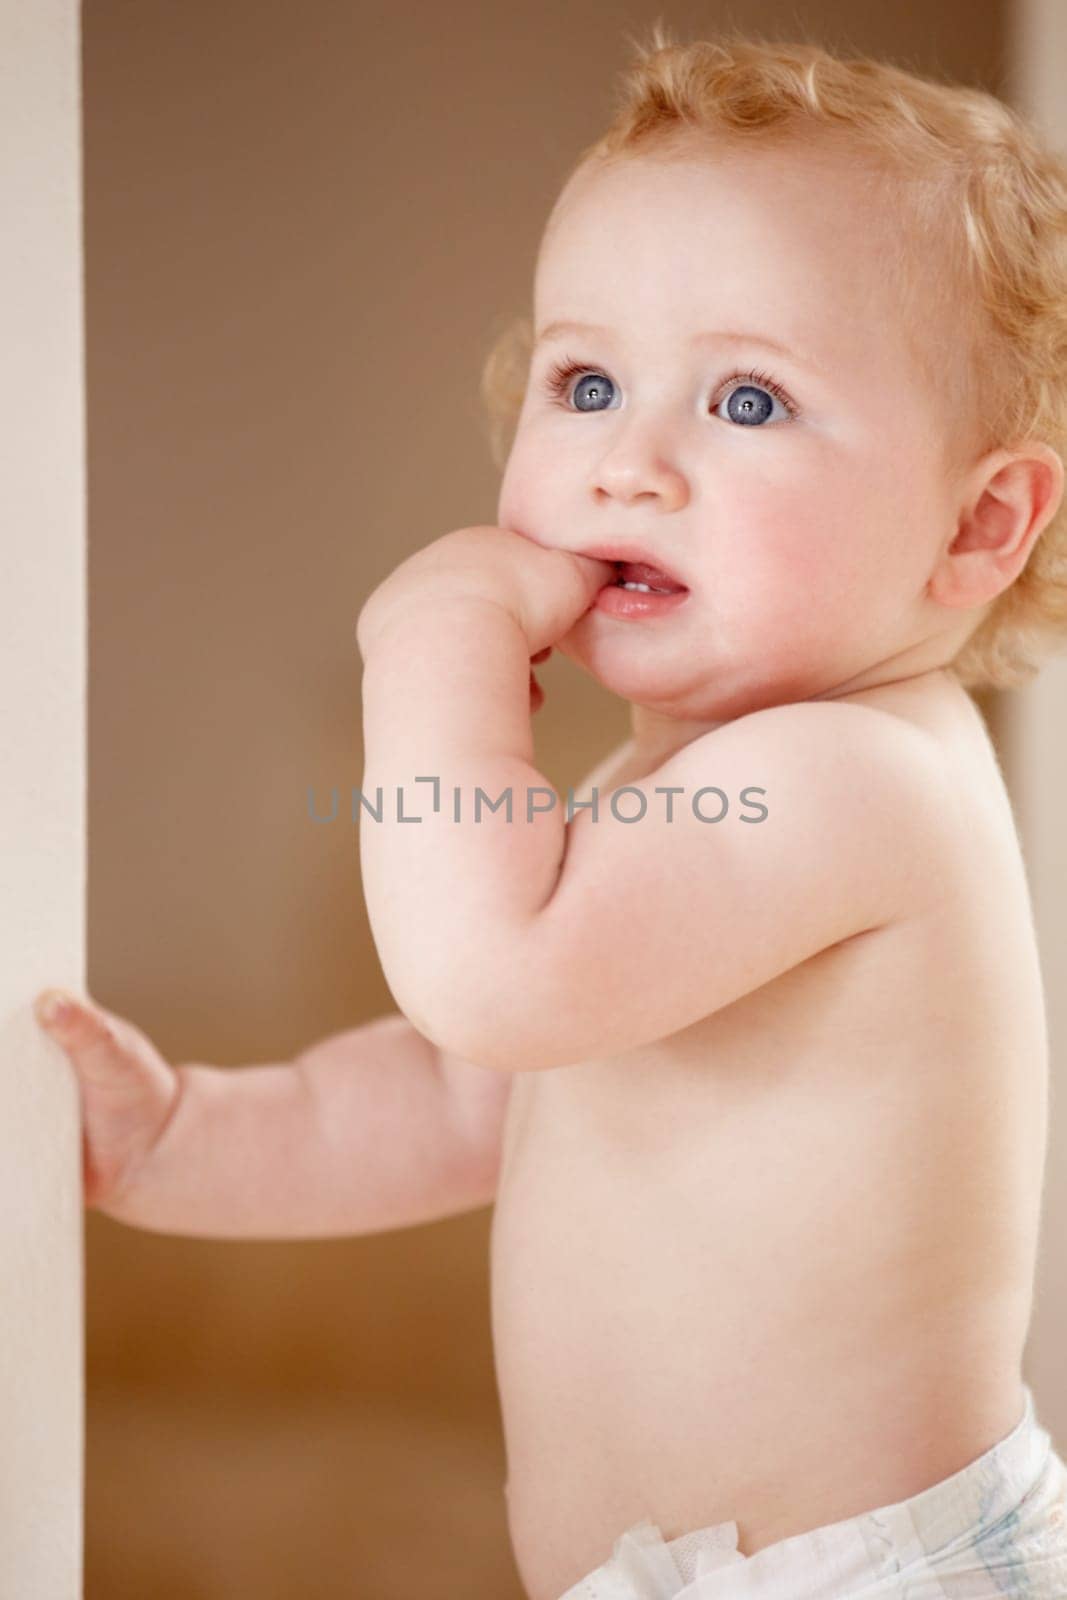 Face, hands and baby in a room for playing, watching or fun, learning, walk or balance. Little, child development and curious boy kid in a nursery playful, standing and enjoy youth, freedom or games.